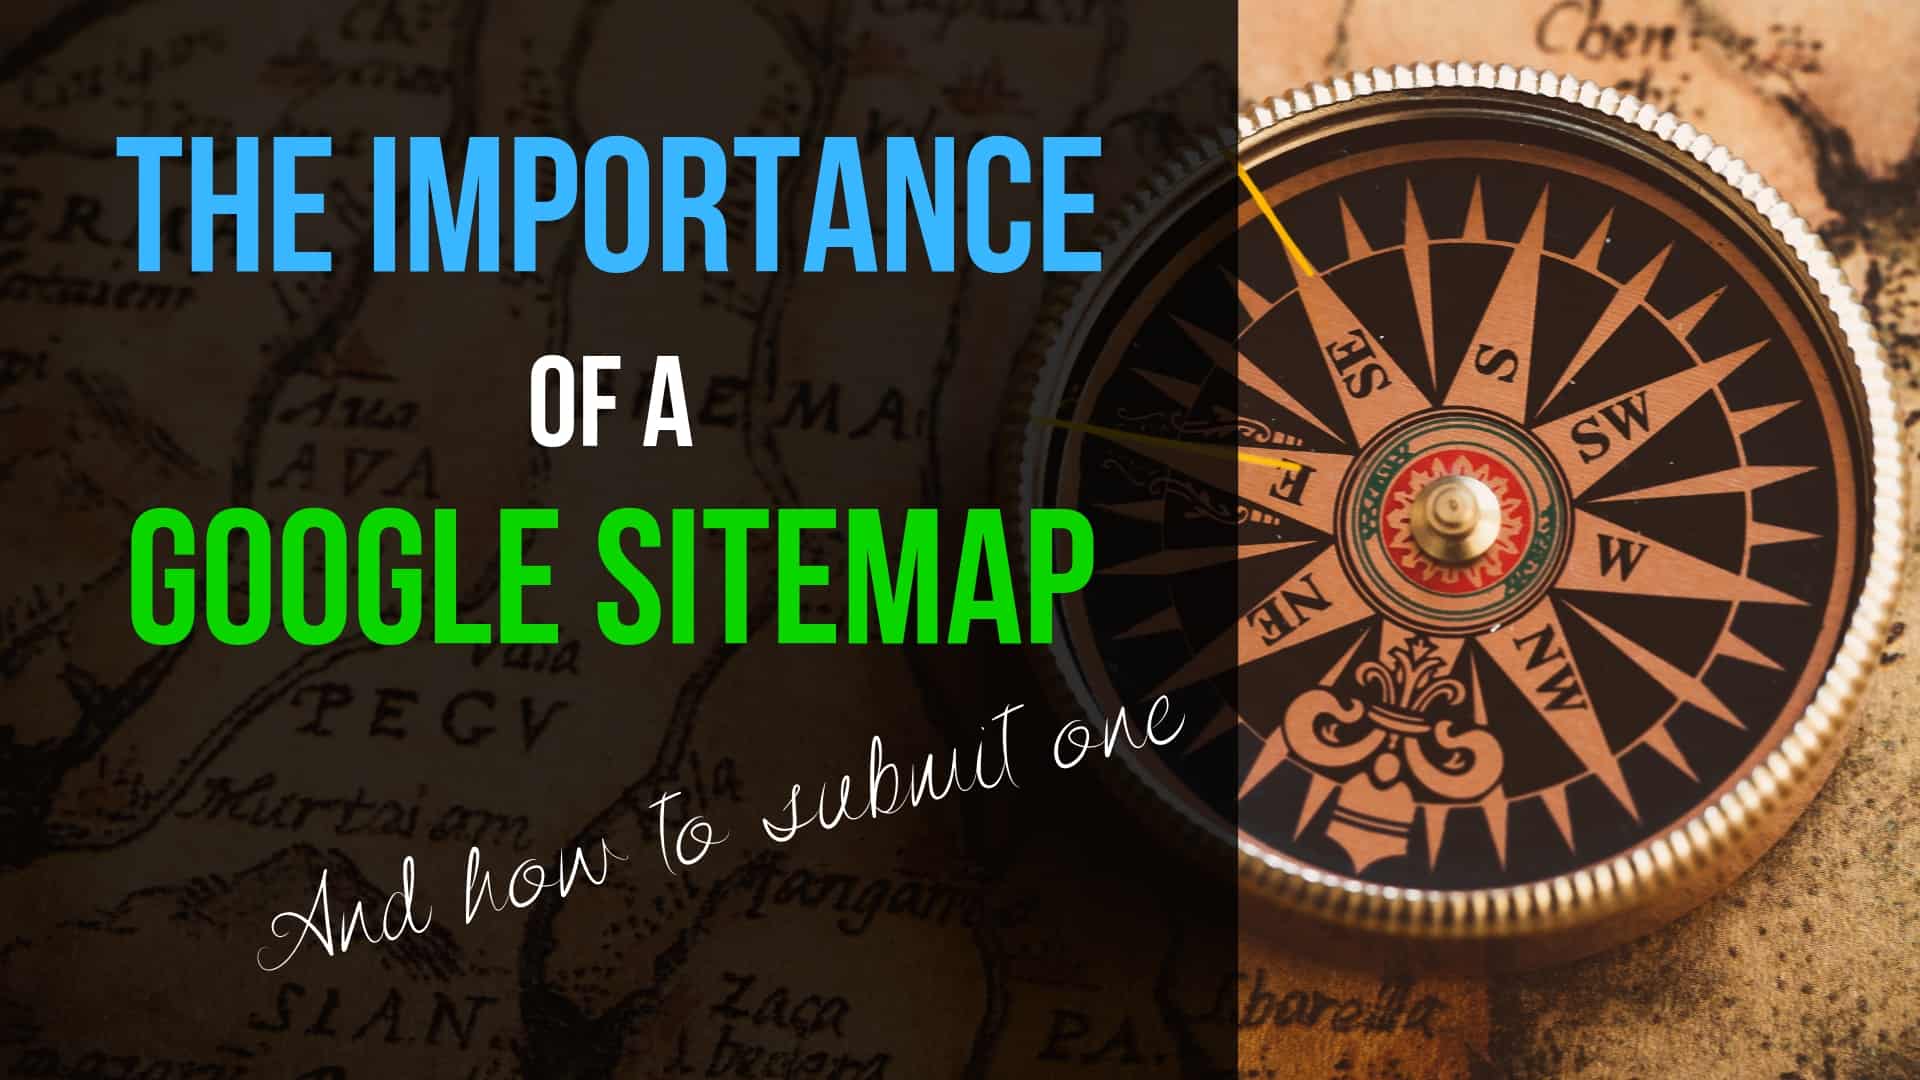 The importance of a Google sitemap